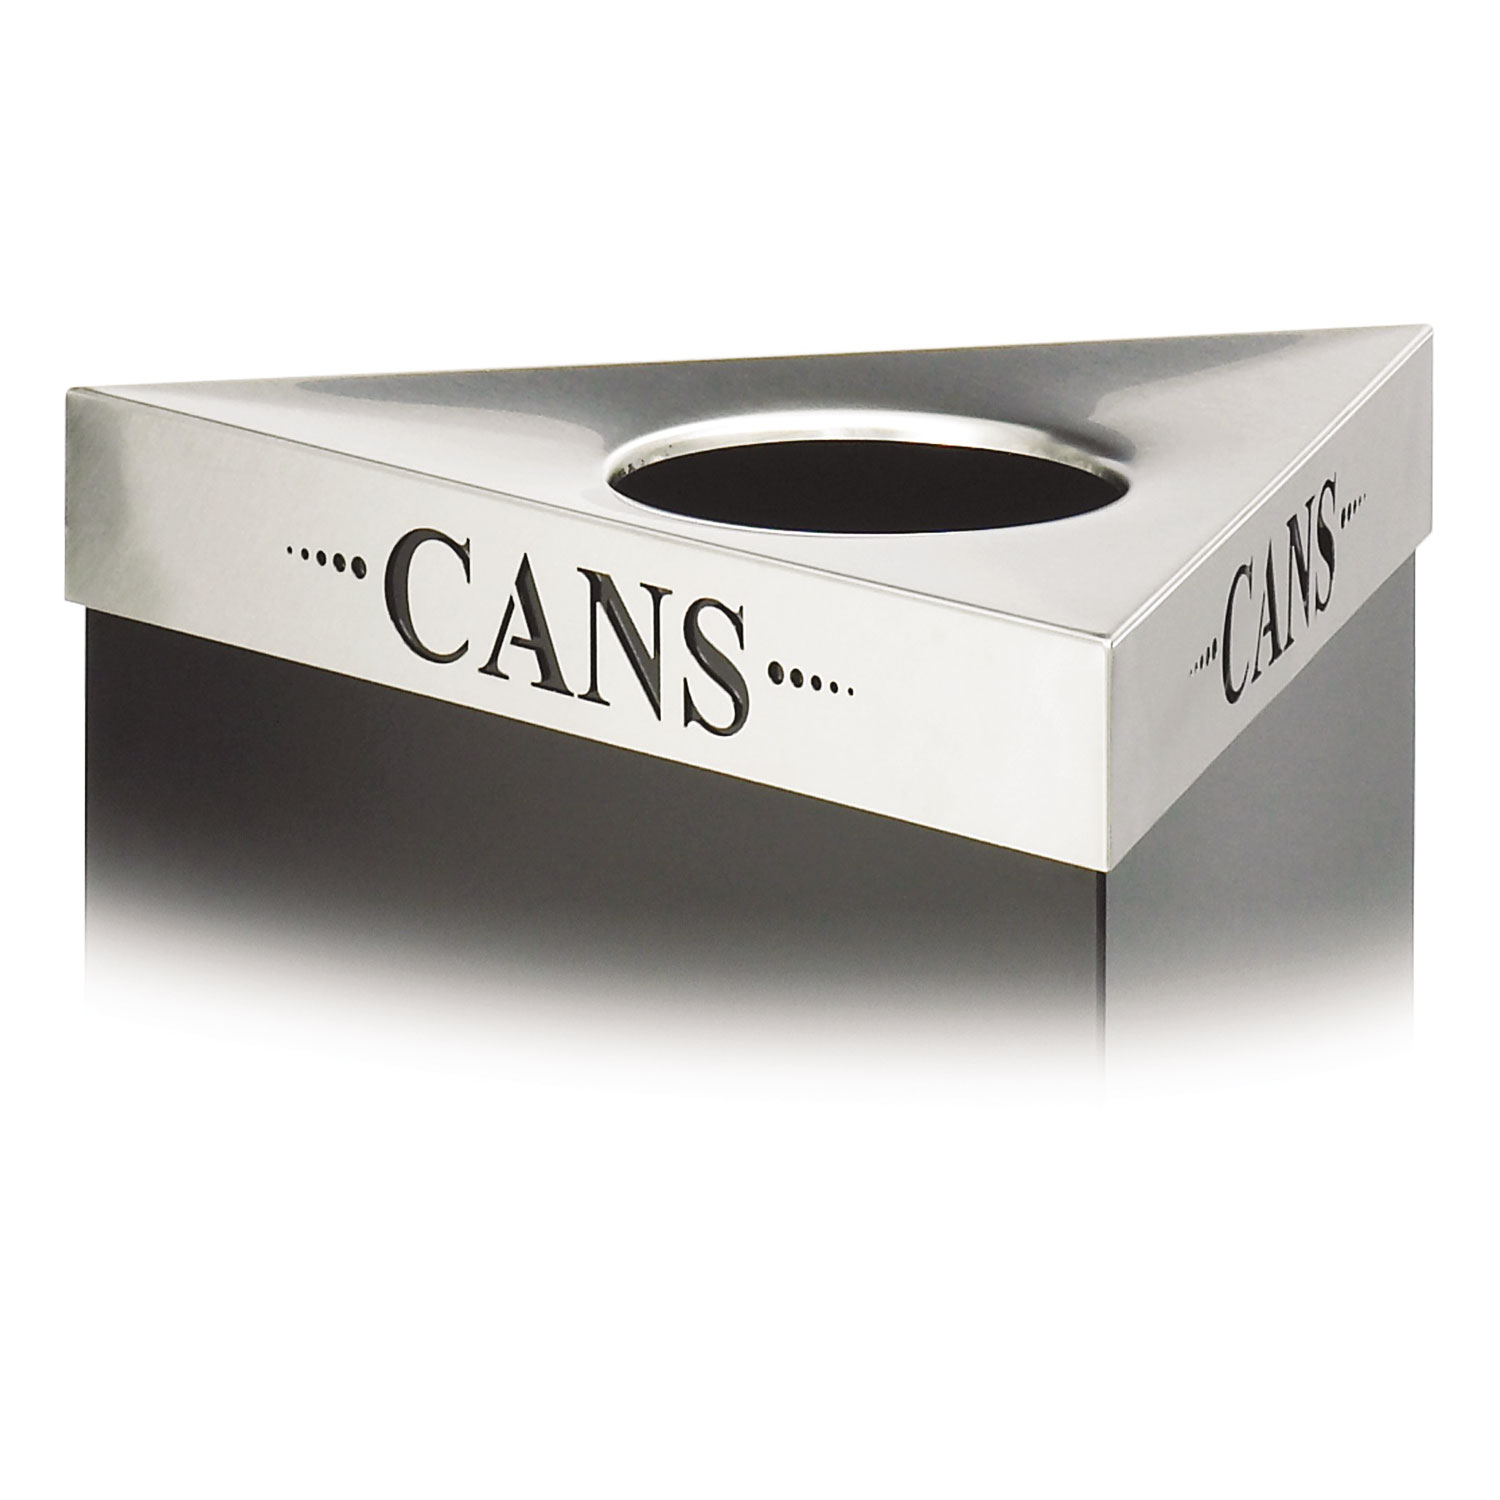 Safco SAF9560CZ  Trifecta Waste Receptacle Lid, Laser Cut "CANS" Inscription, Stainless Steel